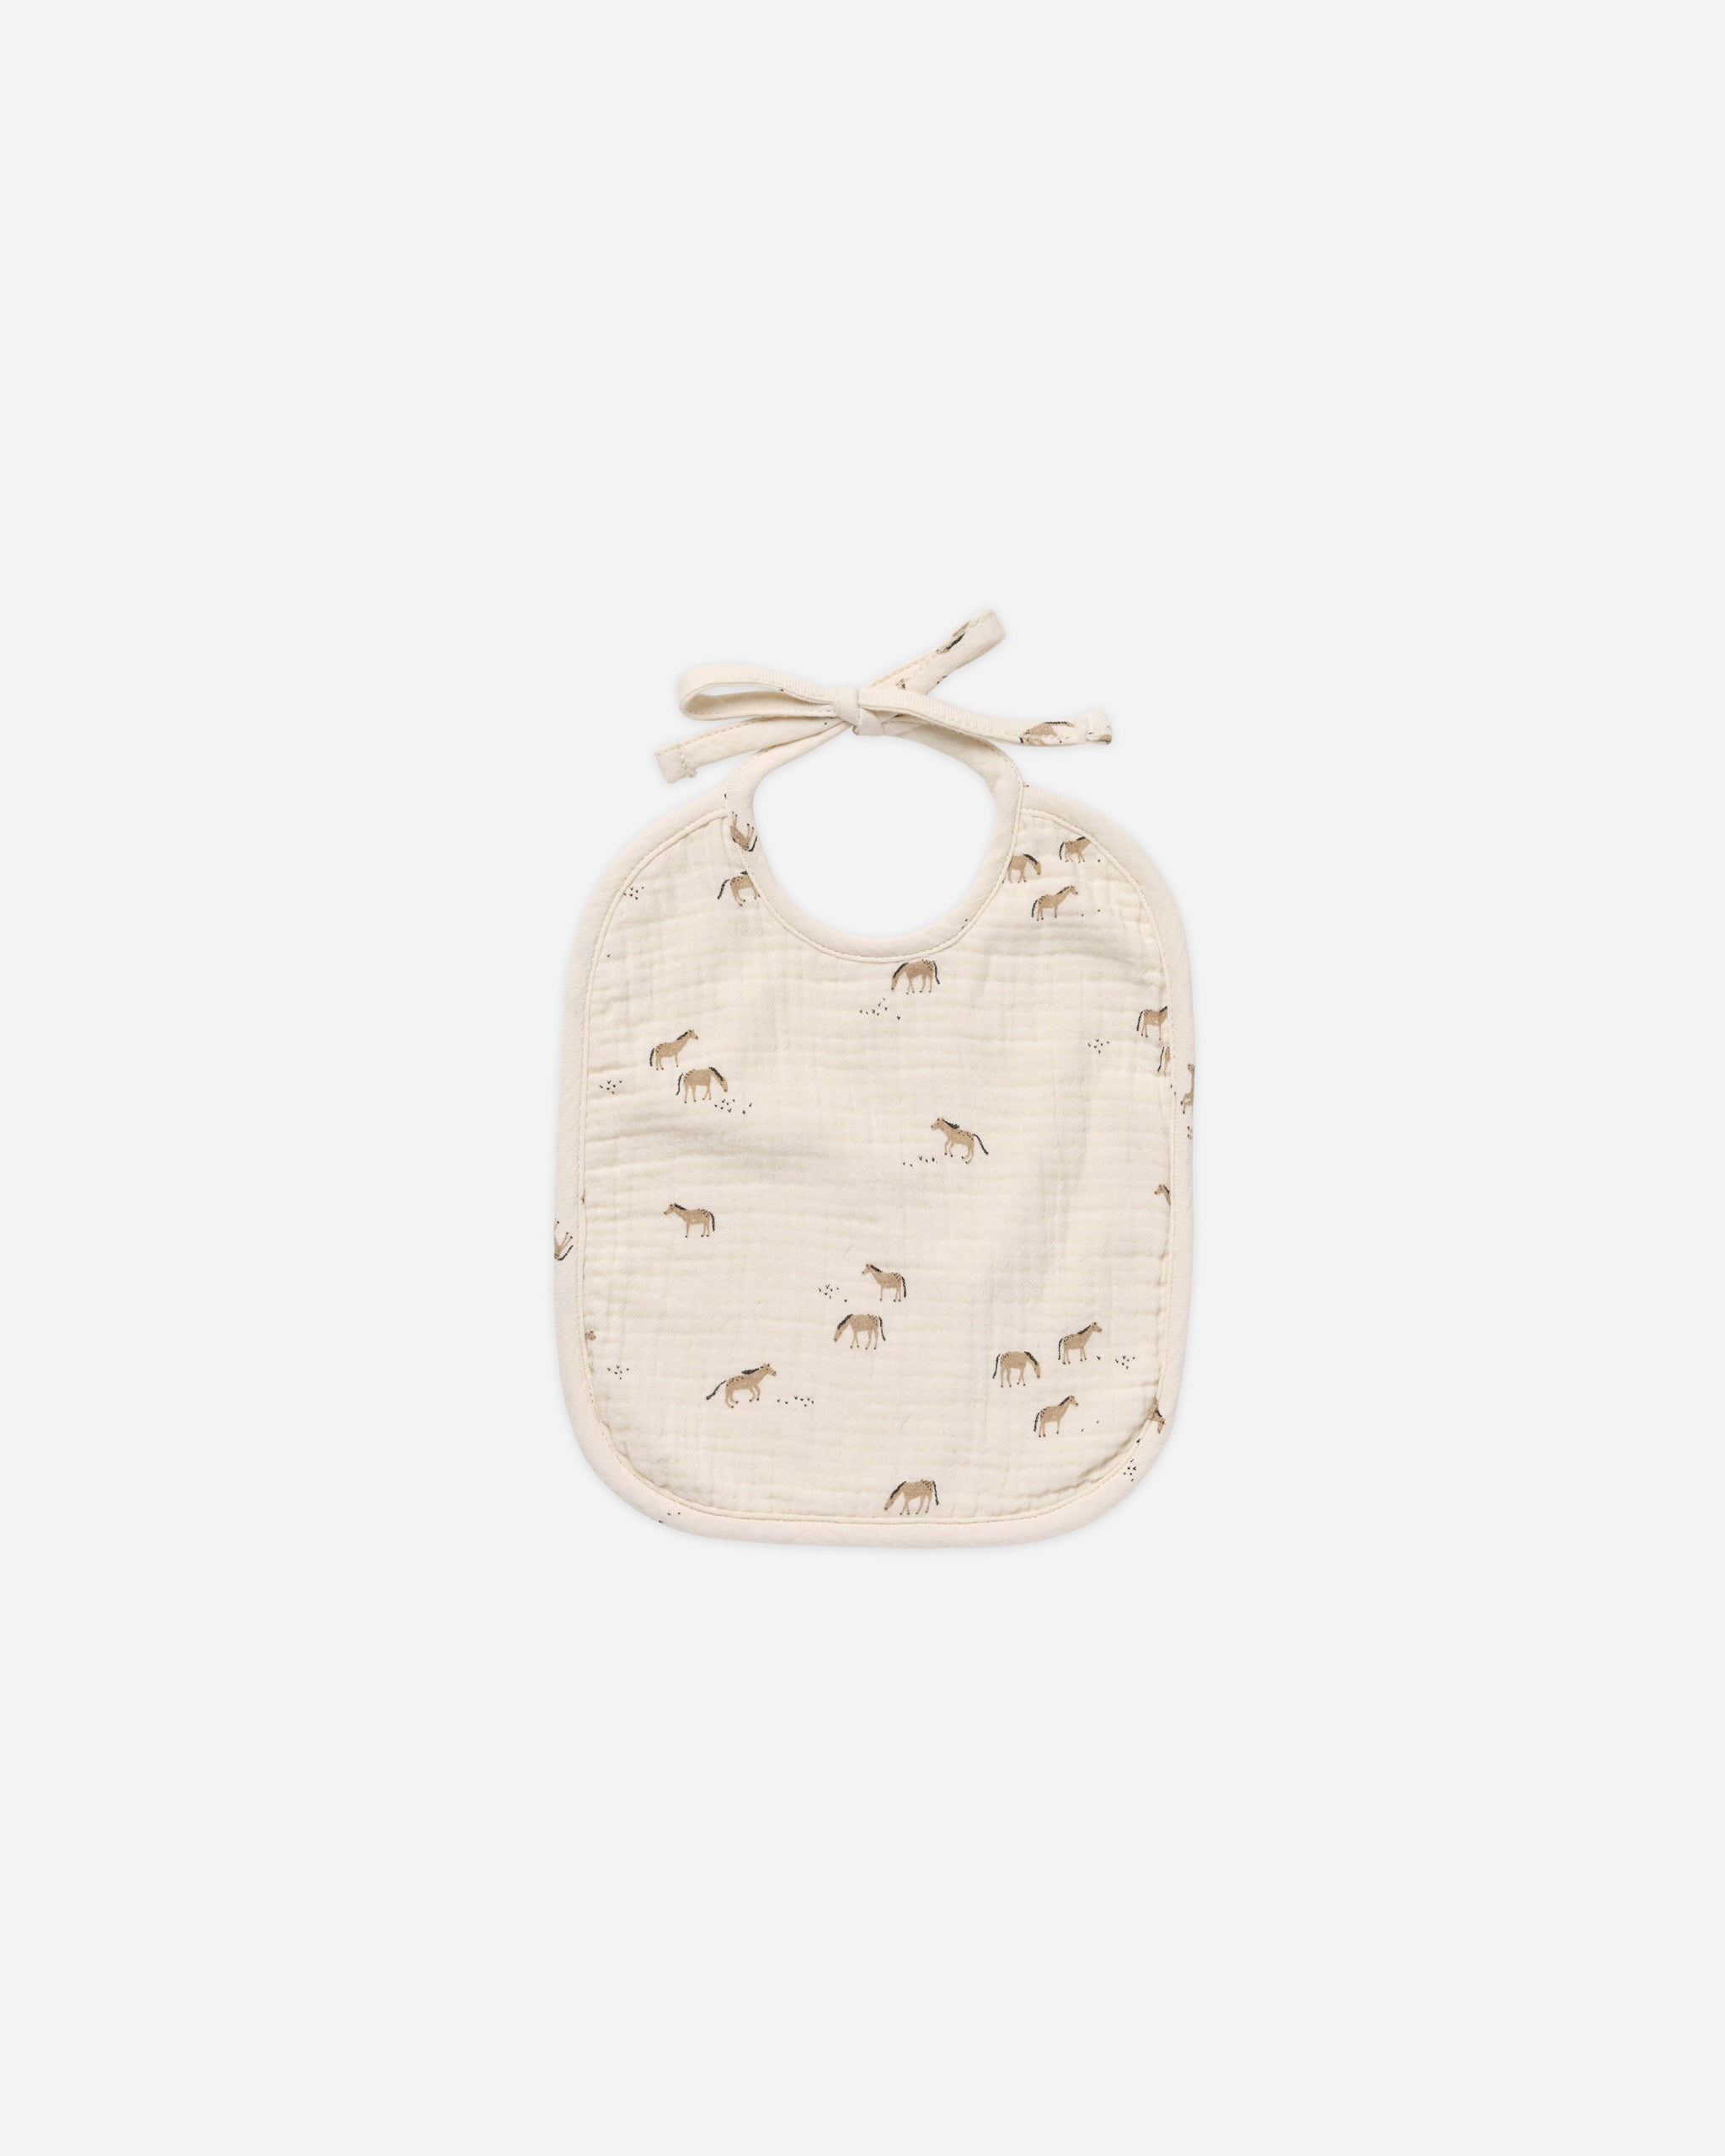 Woven Tie Bib || Horses - Rylee + Cru | Kids Clothes | Trendy Baby Clothes | Modern Infant Outfits |